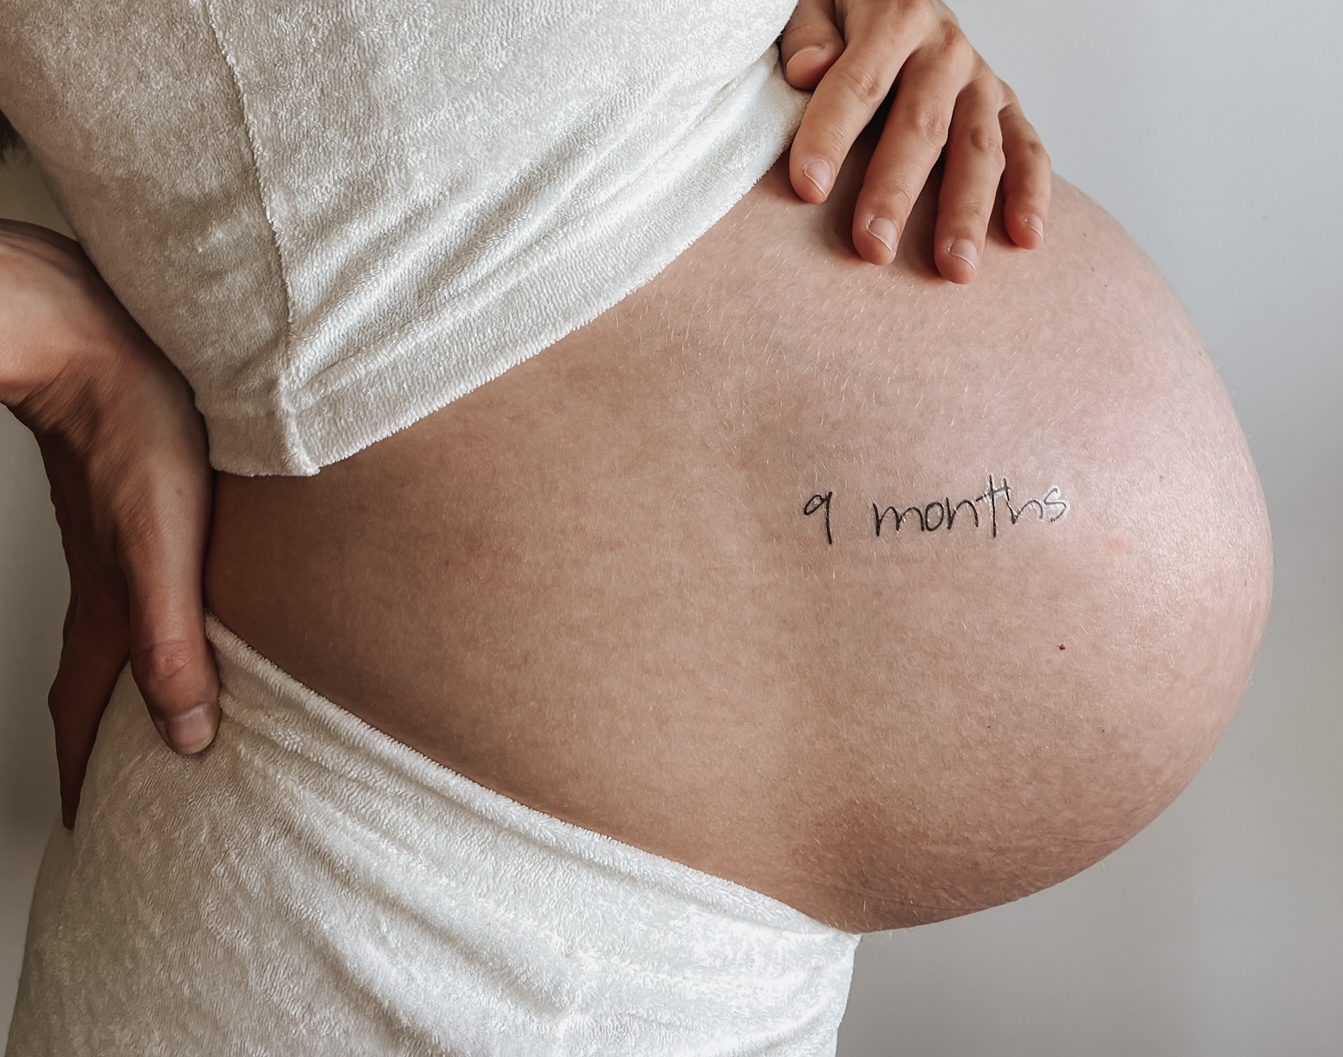 Third Trimester Checklist: Everything you need to thrive